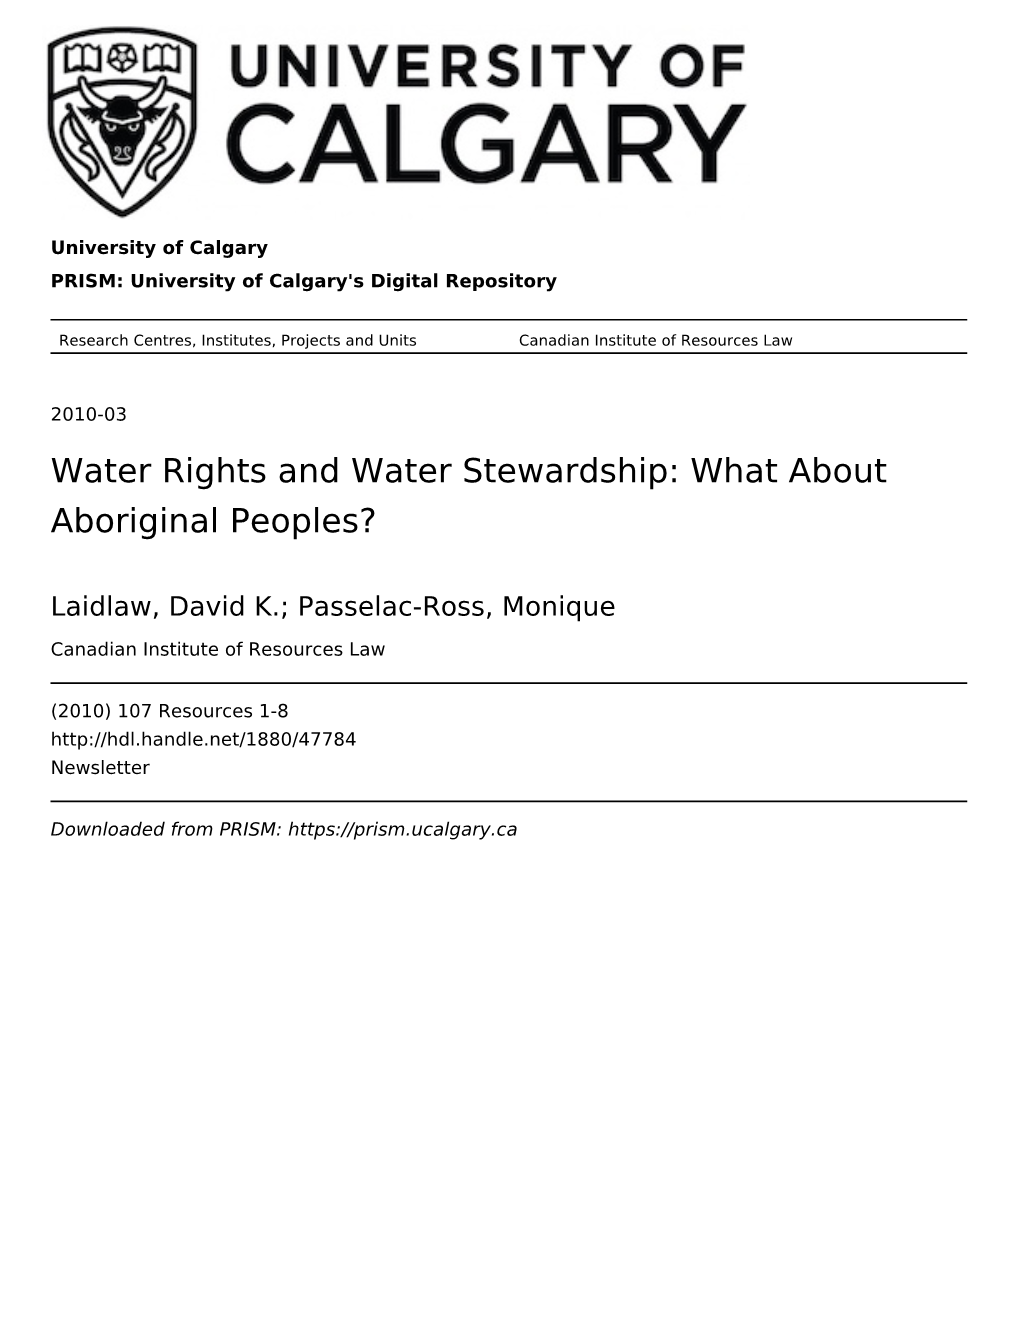 Water Rights and Water Stewardship: What About Aboriginal Peoples?